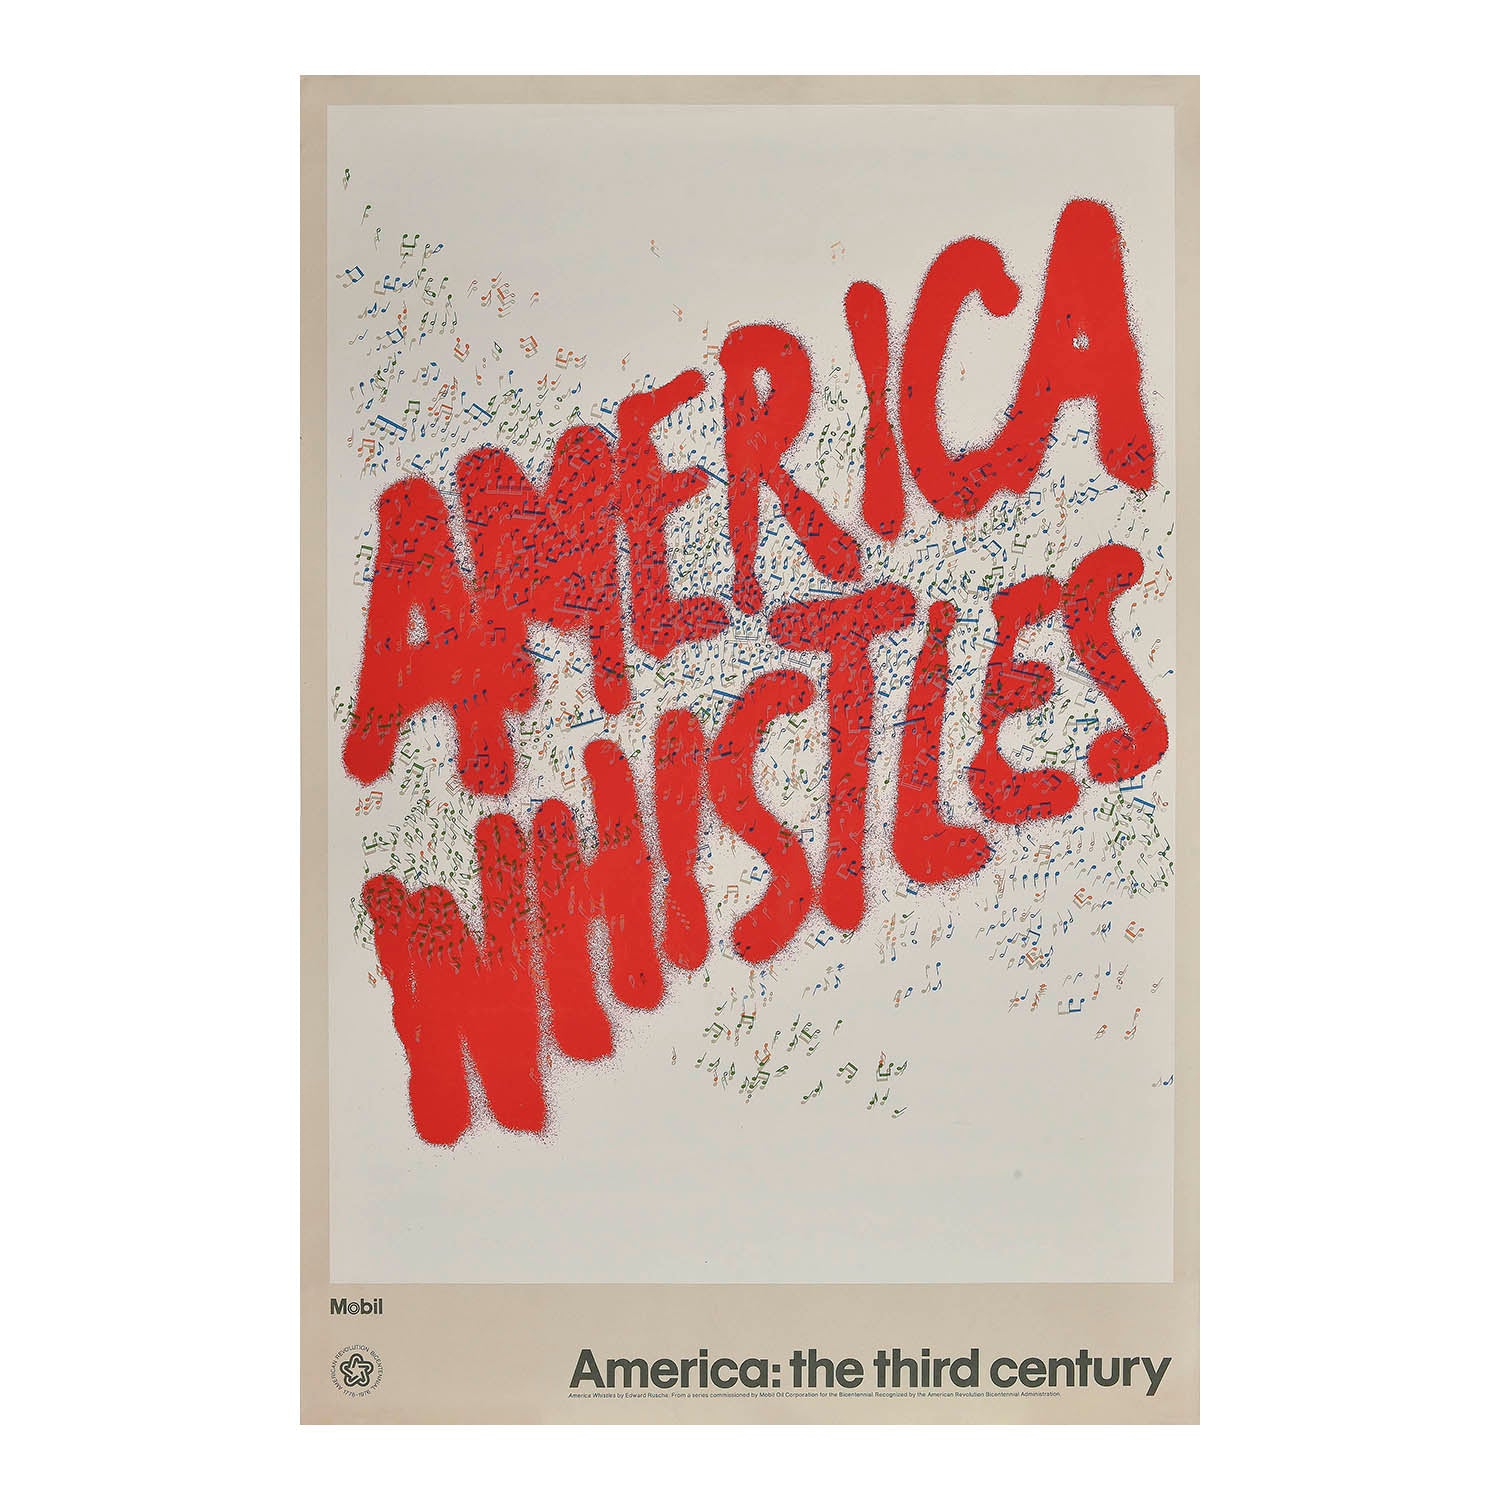 Original art poster, America Whistles. America: the third century, designed by Edward Ruscha, 1976. From a series commissioned by the Mobil Oil Corporation to mark the Bicentennial of the American Revolution